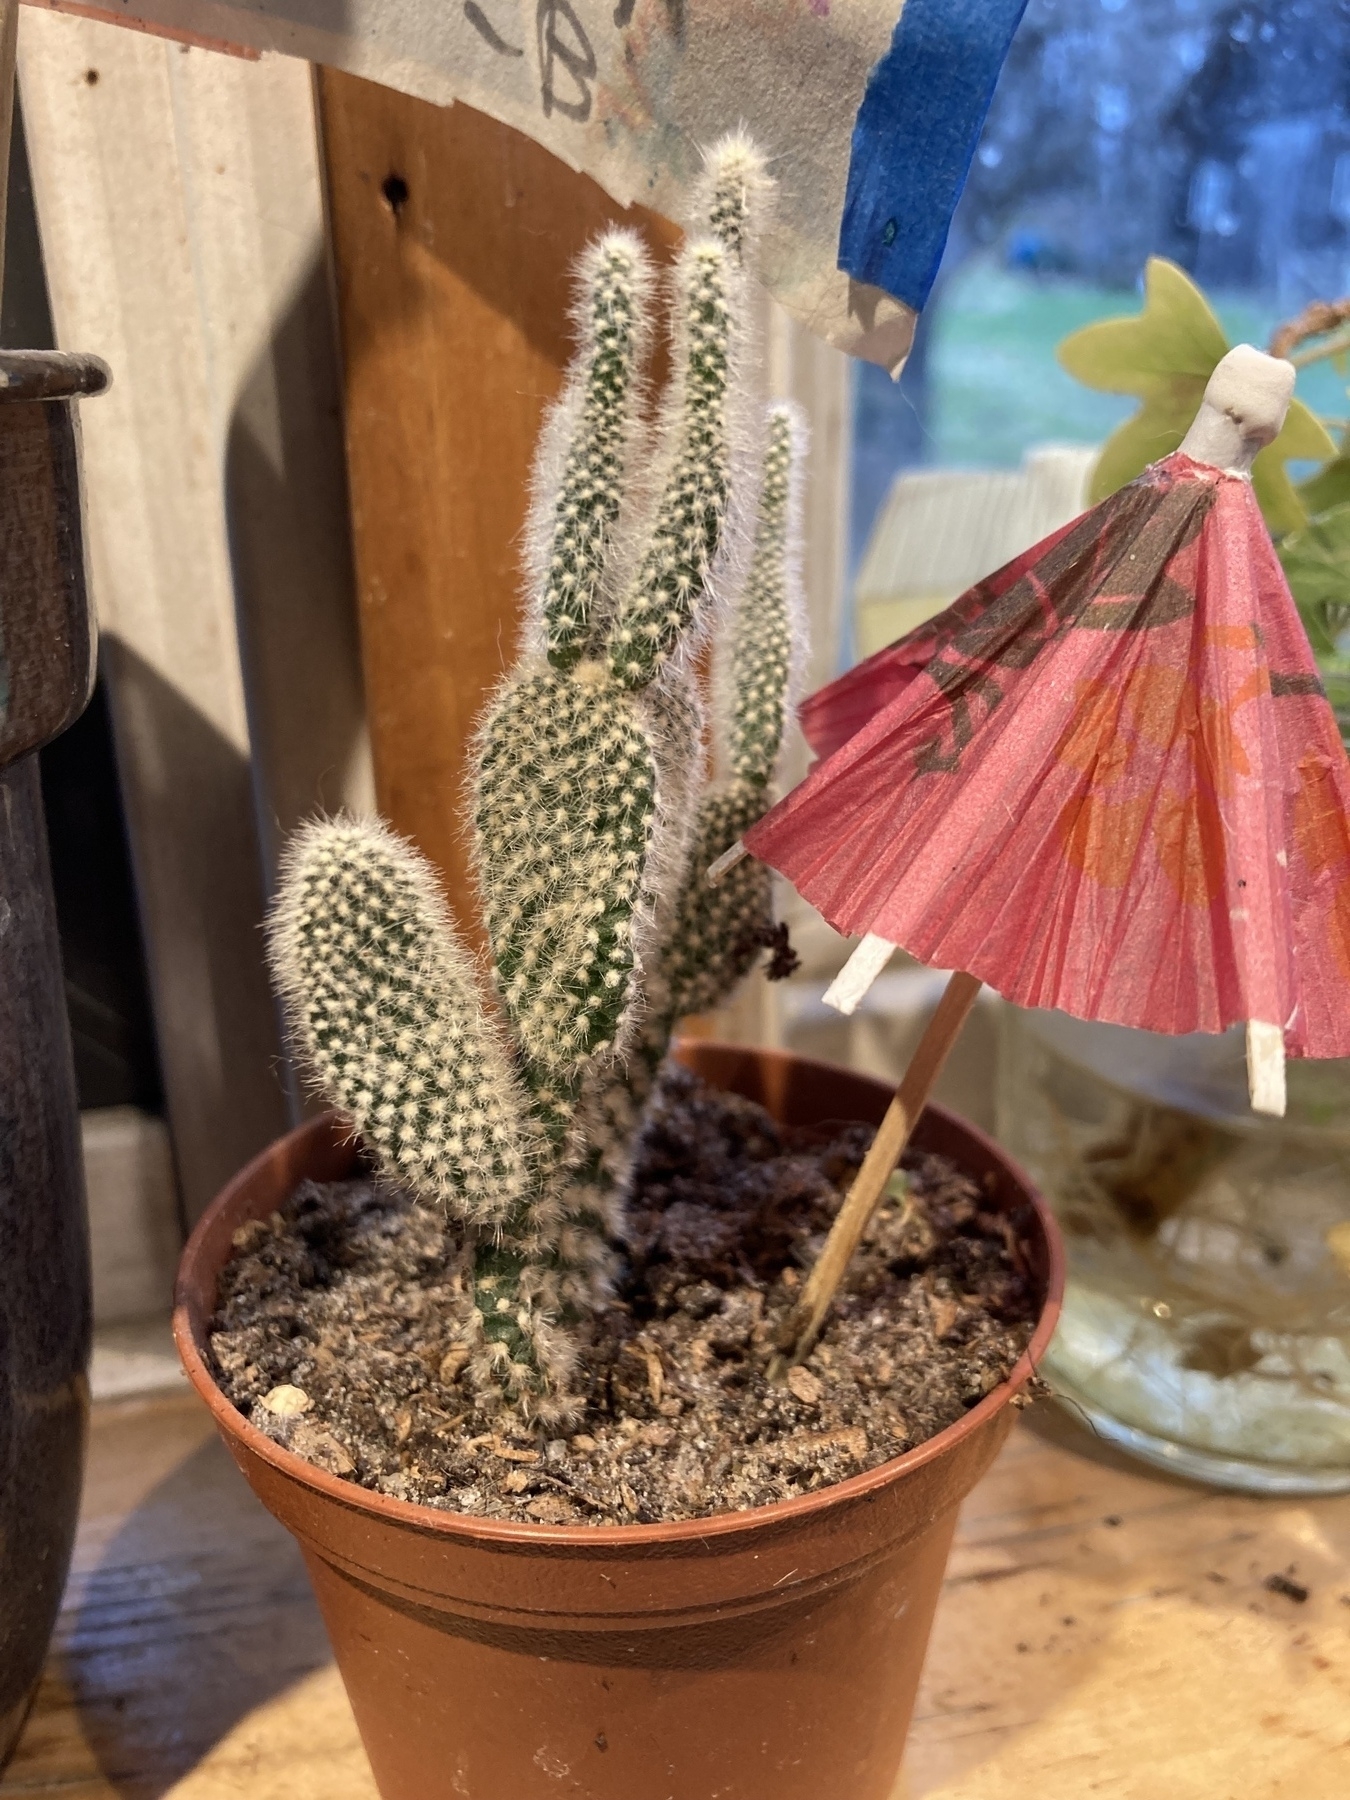 A potted cactus on a windowsill